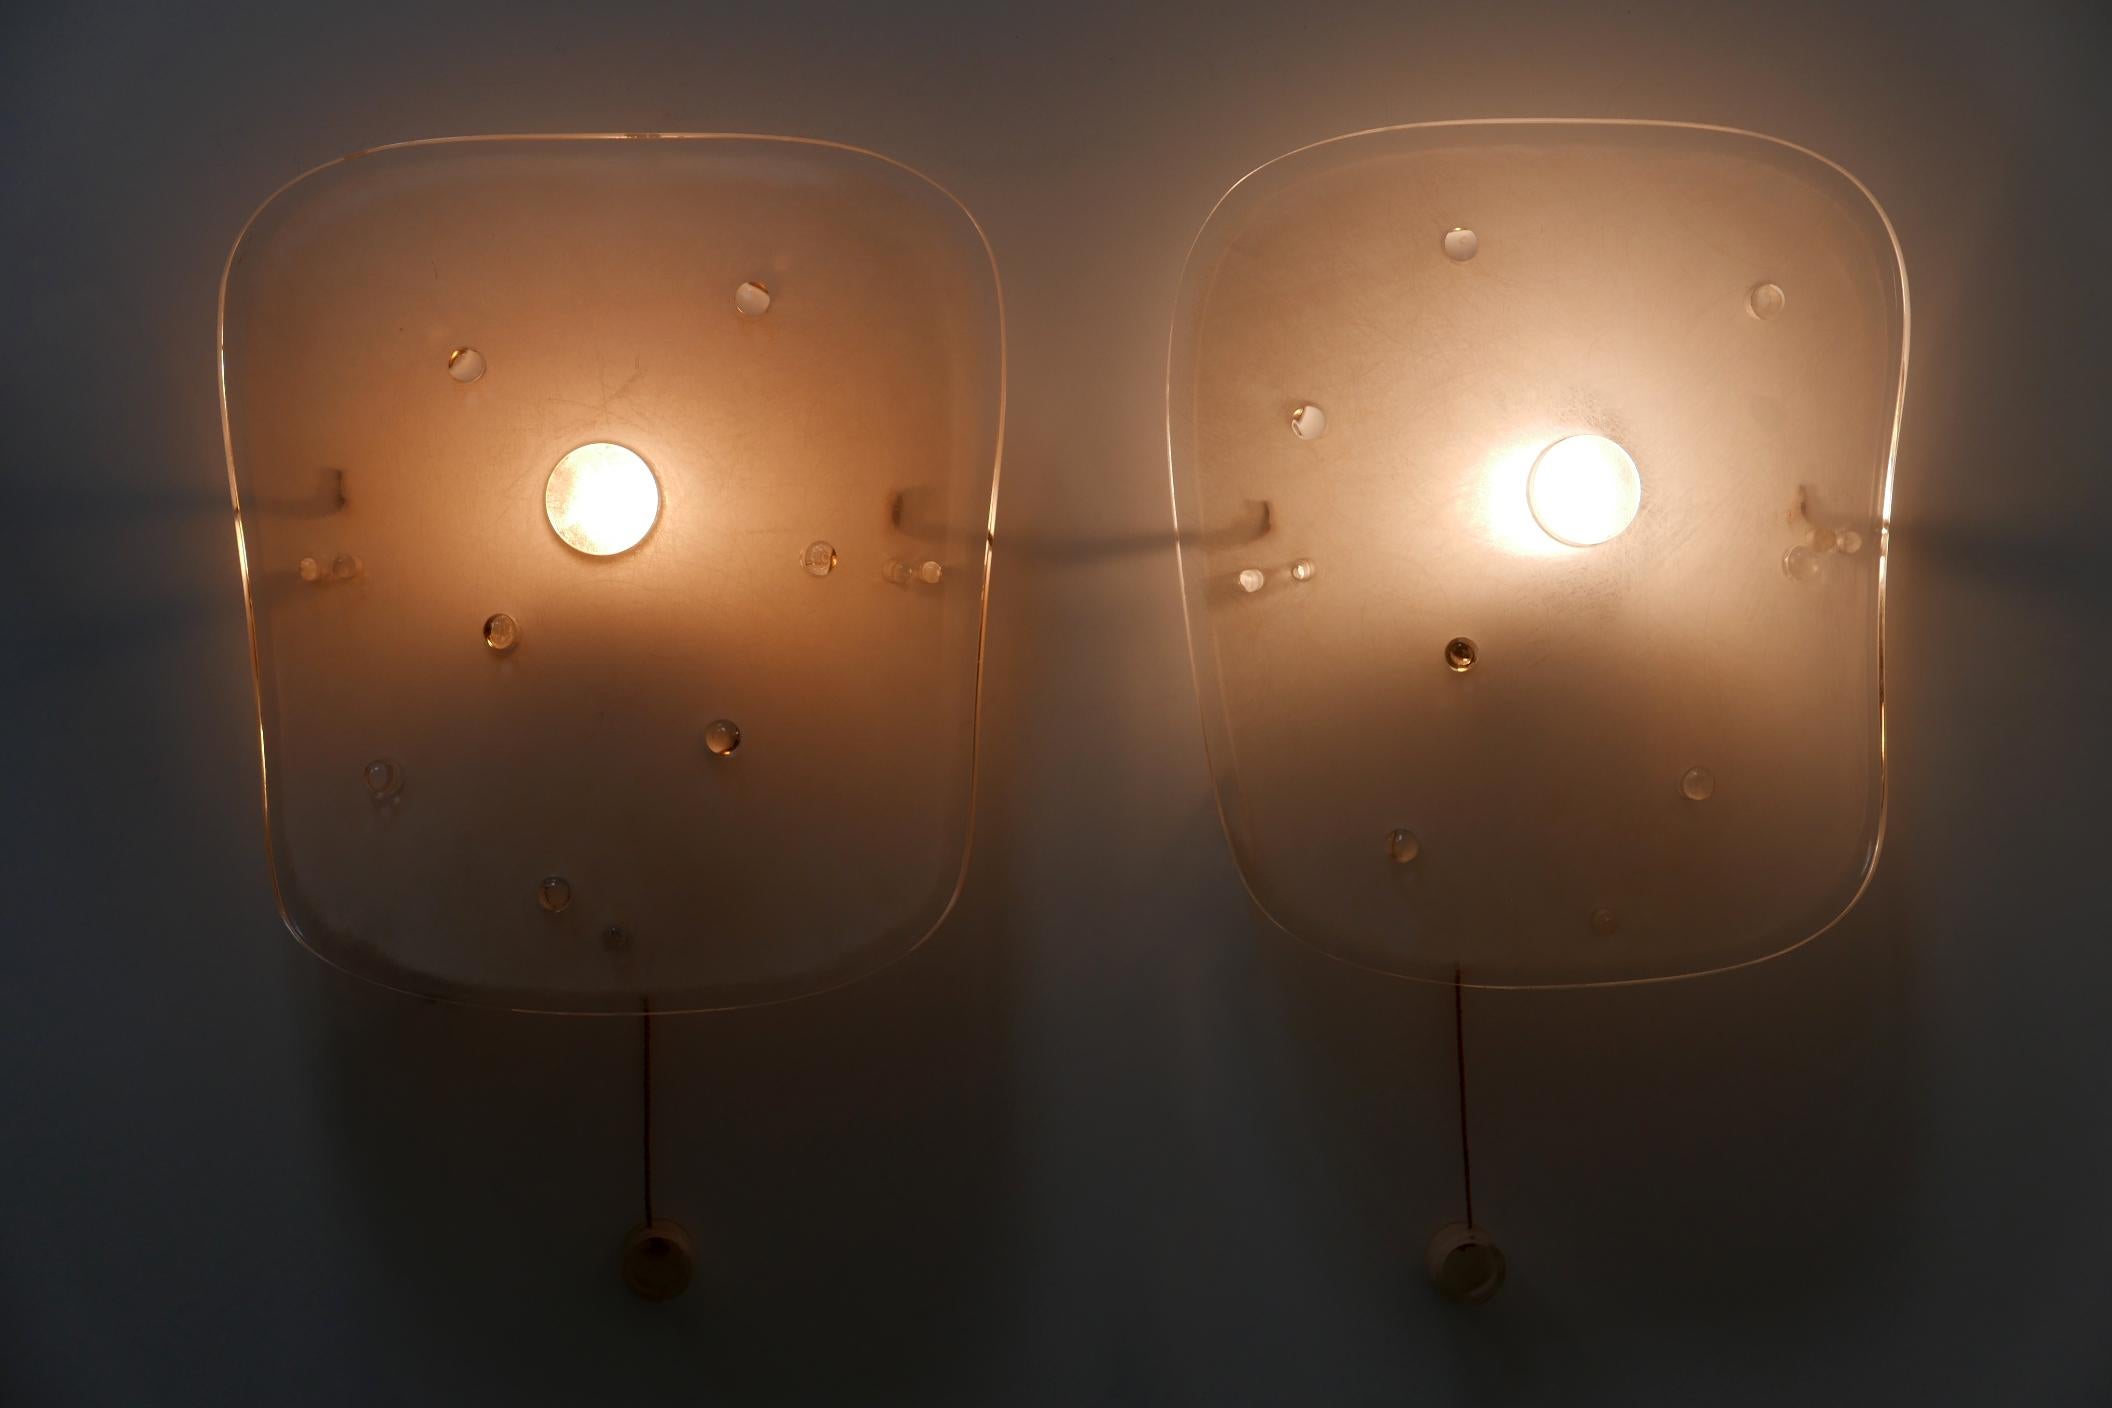 Set of two rare and highly decorative Mid-Century Modern Lucite wall lamps or sconces. Manufactured probably by Rupert Nikoll, 1960s, Austria.

The lamps are executed in textured plexiglass with brass base. Each lamp needs 1 x E27 / E26 Edison